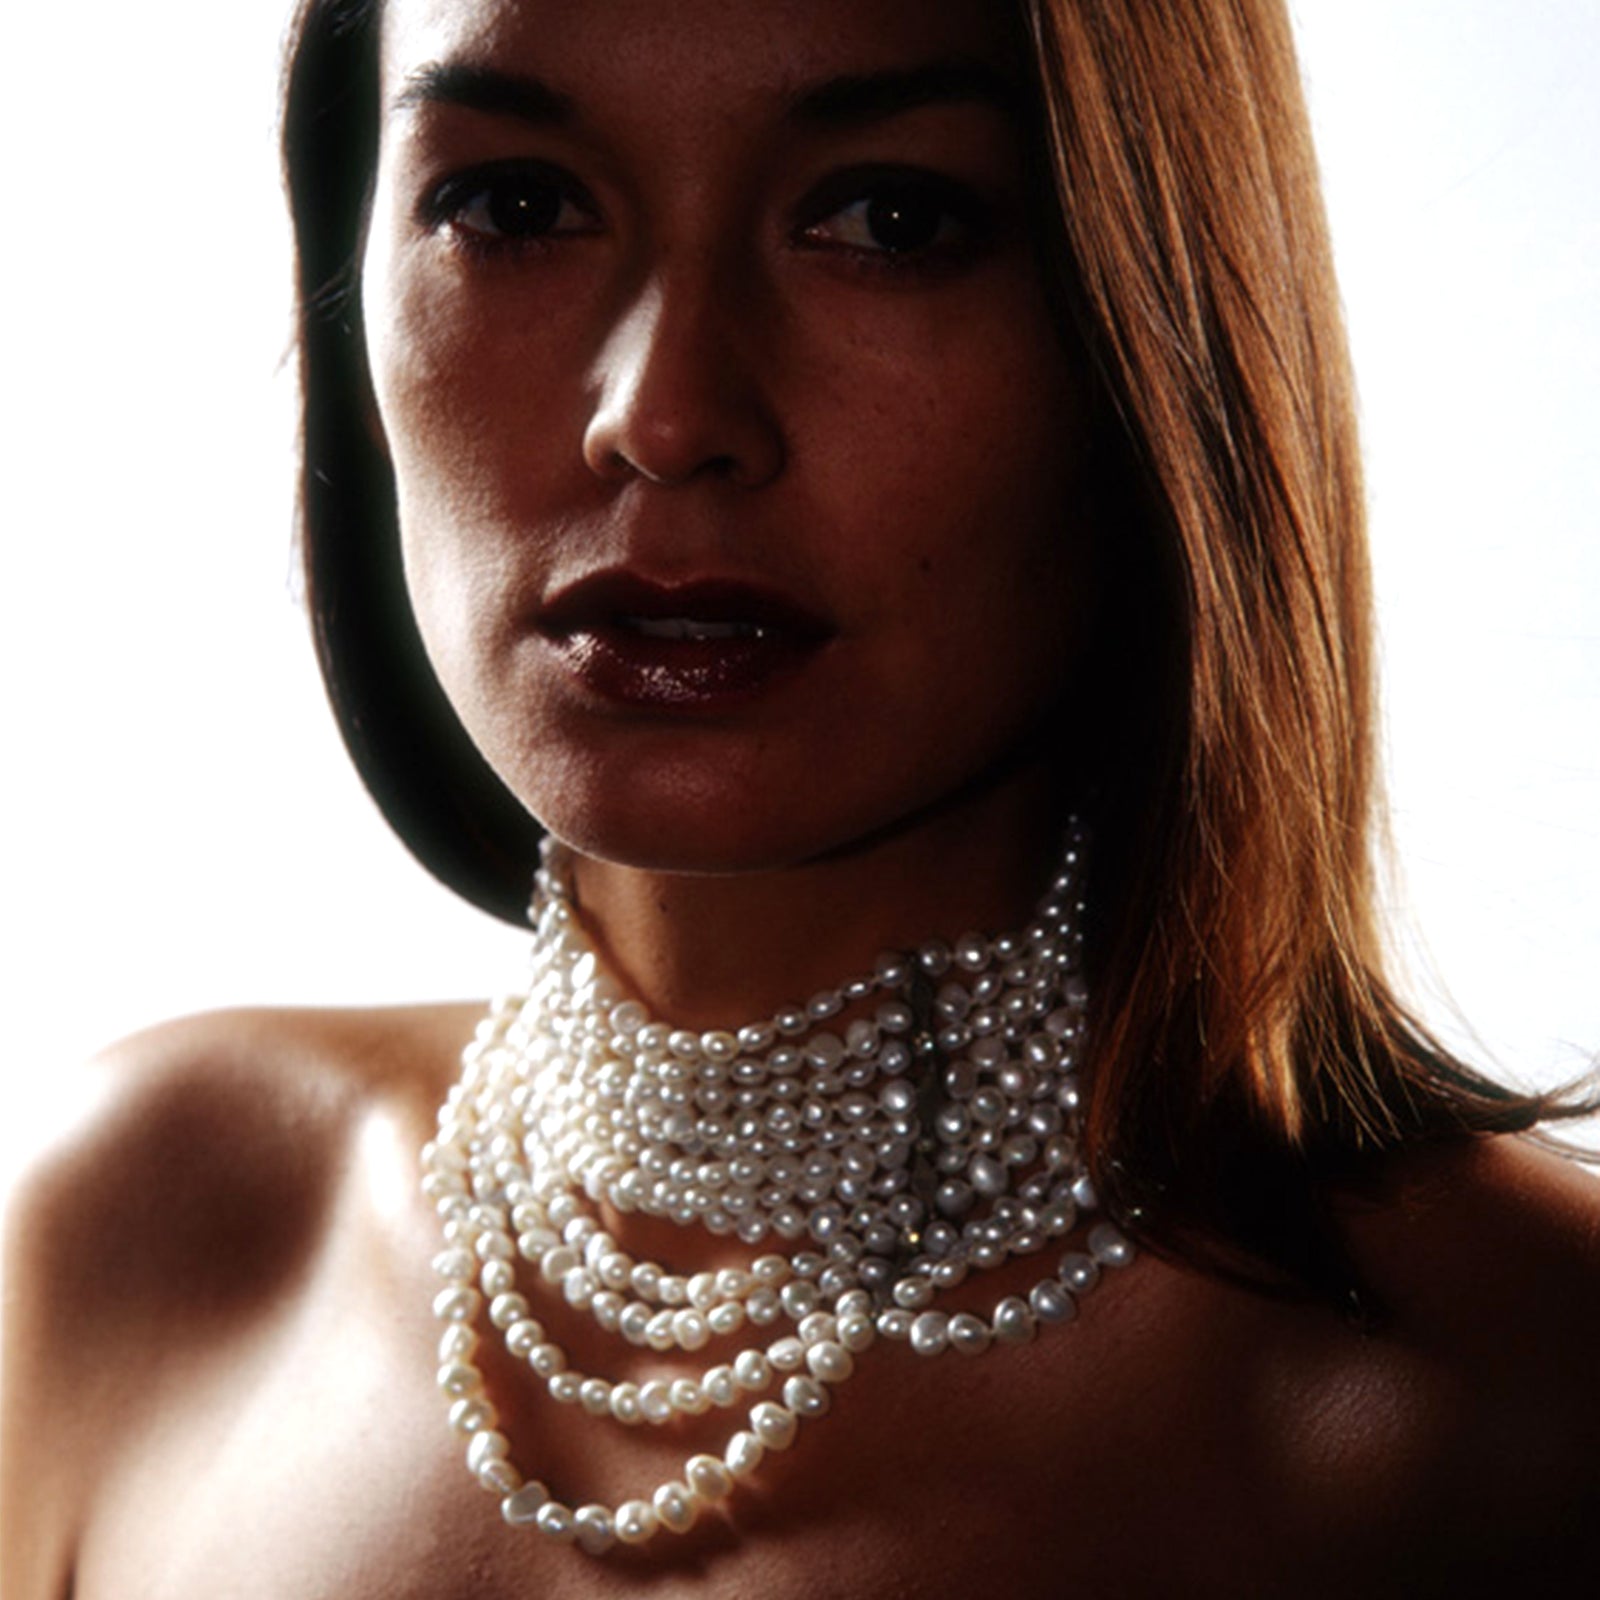 Beginner's Guide to the Unique Shapes in Pearls